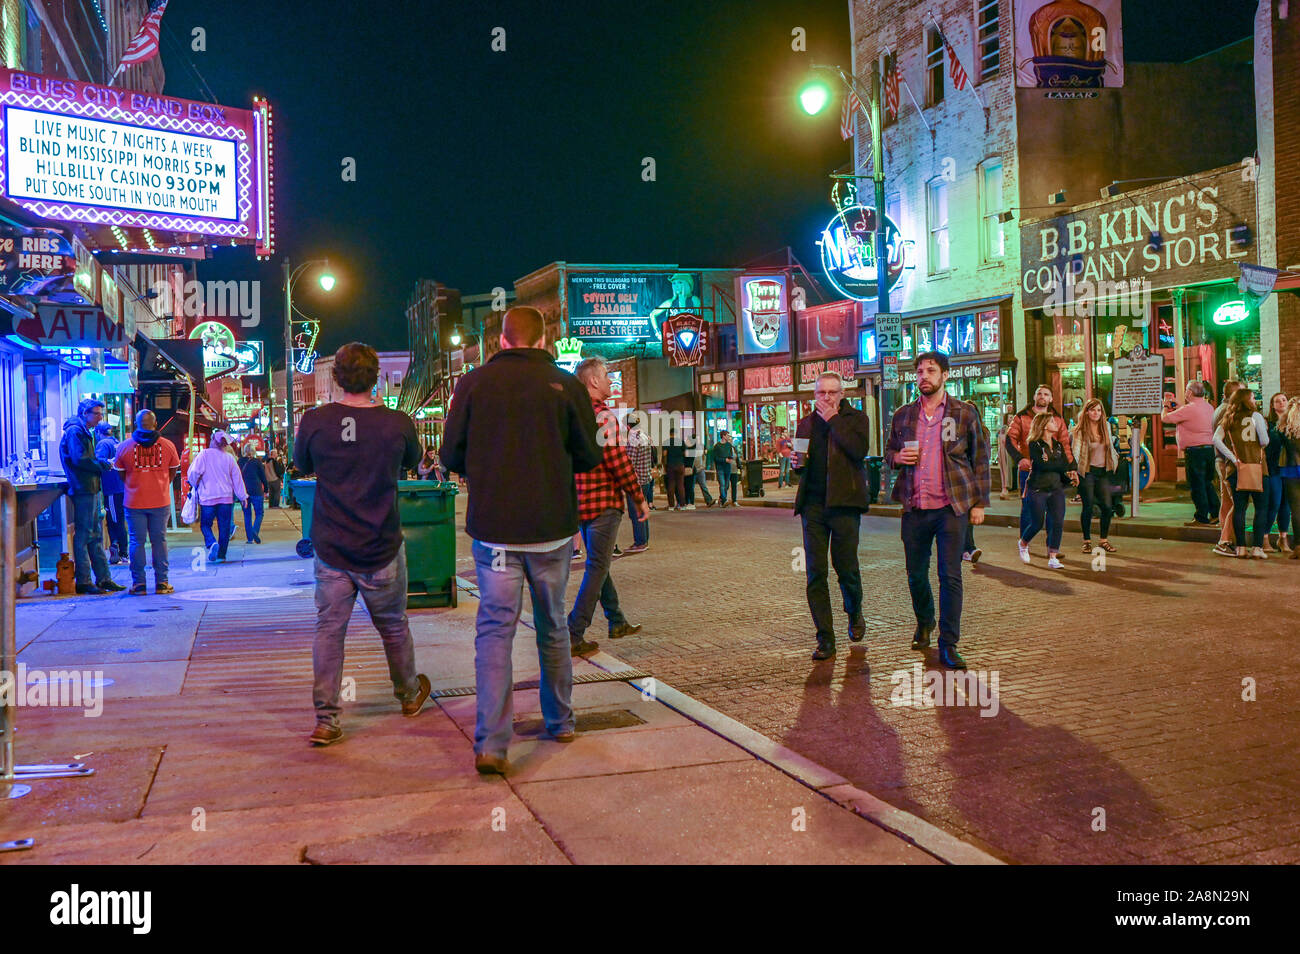 Beale Street in Memphis Tennessee by night. This street is famous for its blues clubs. Stock Photo